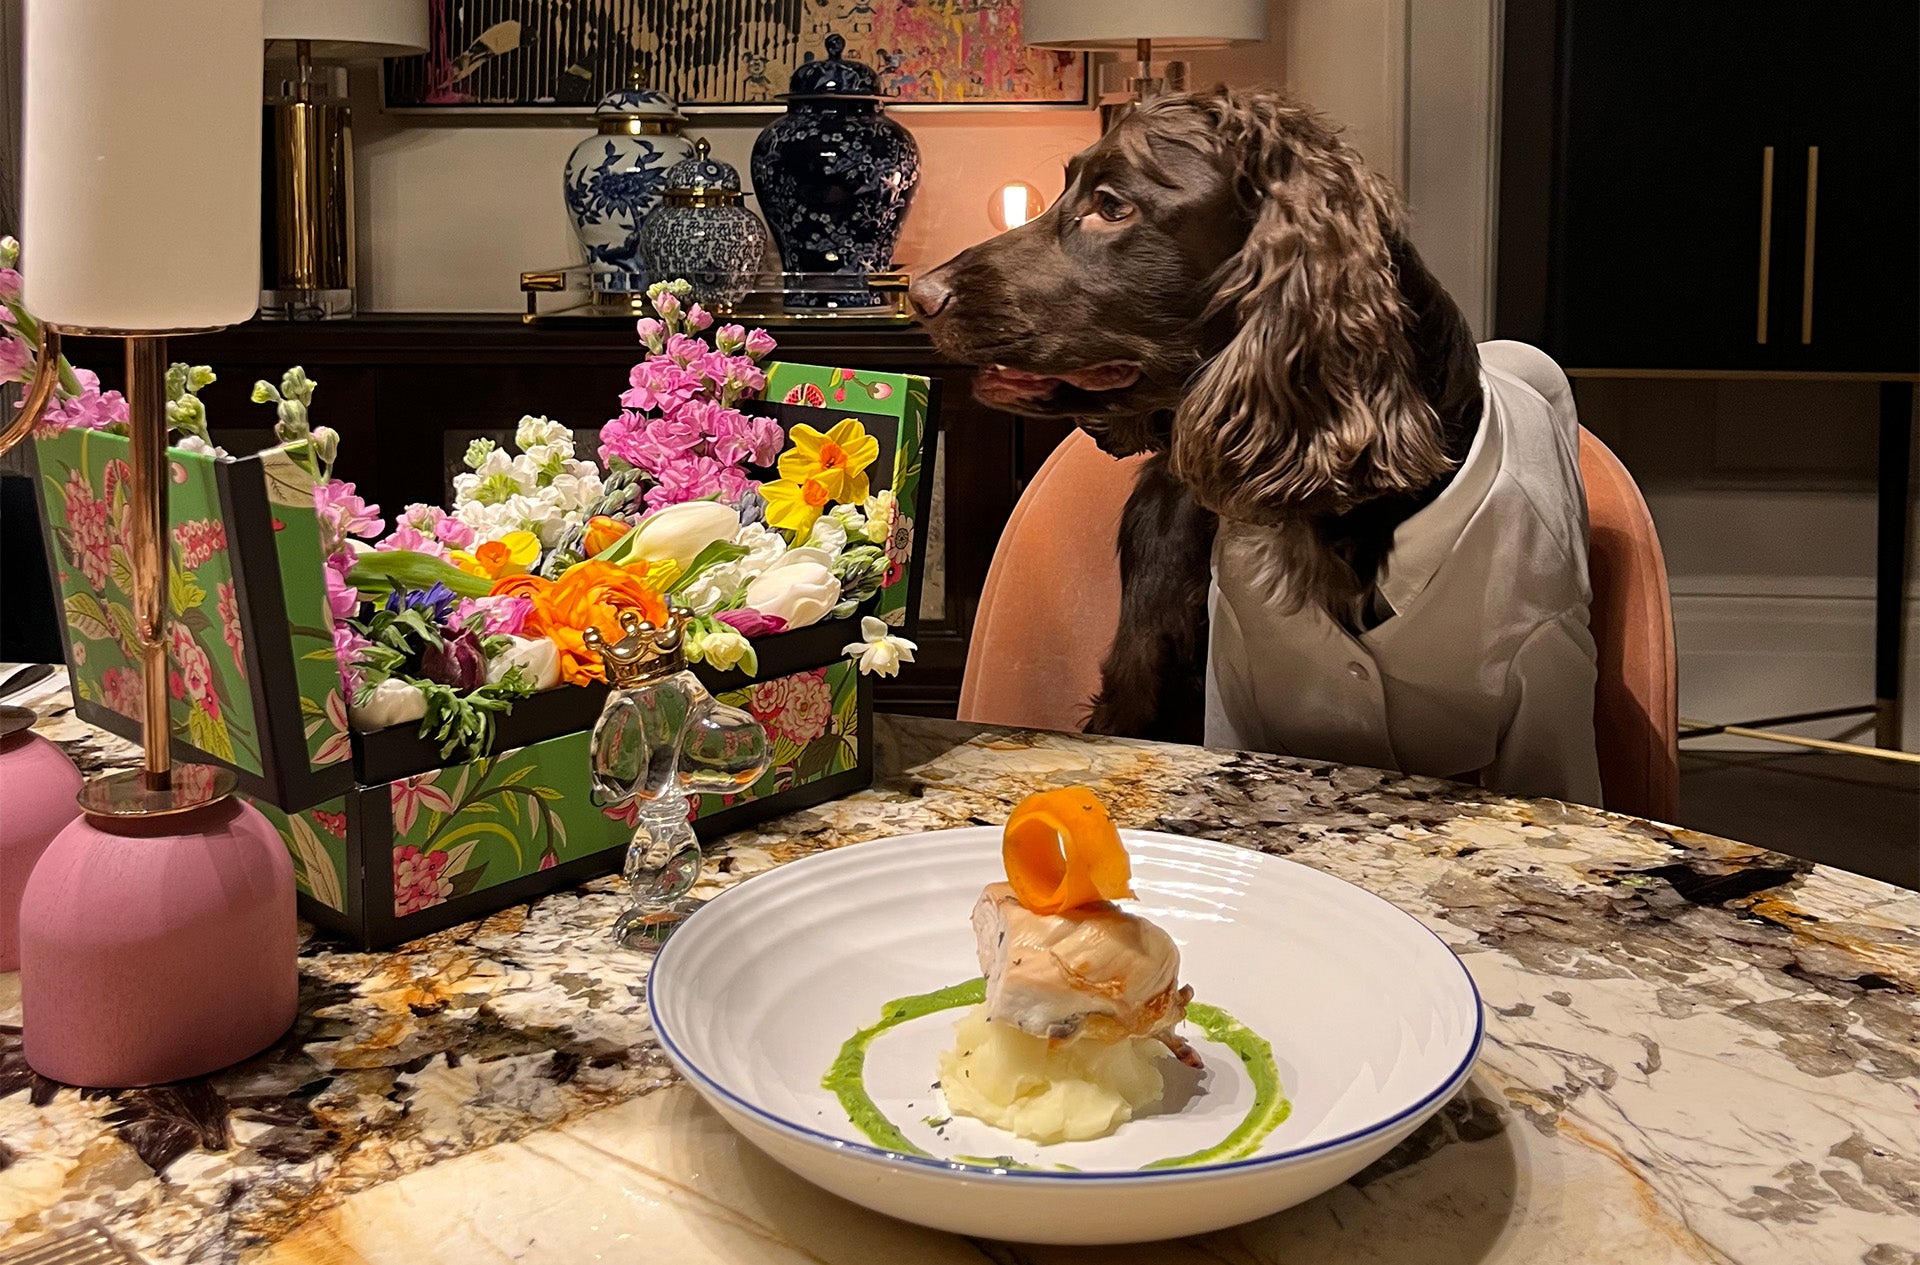 A dog posing with an Over Glam Suit in front of a meal